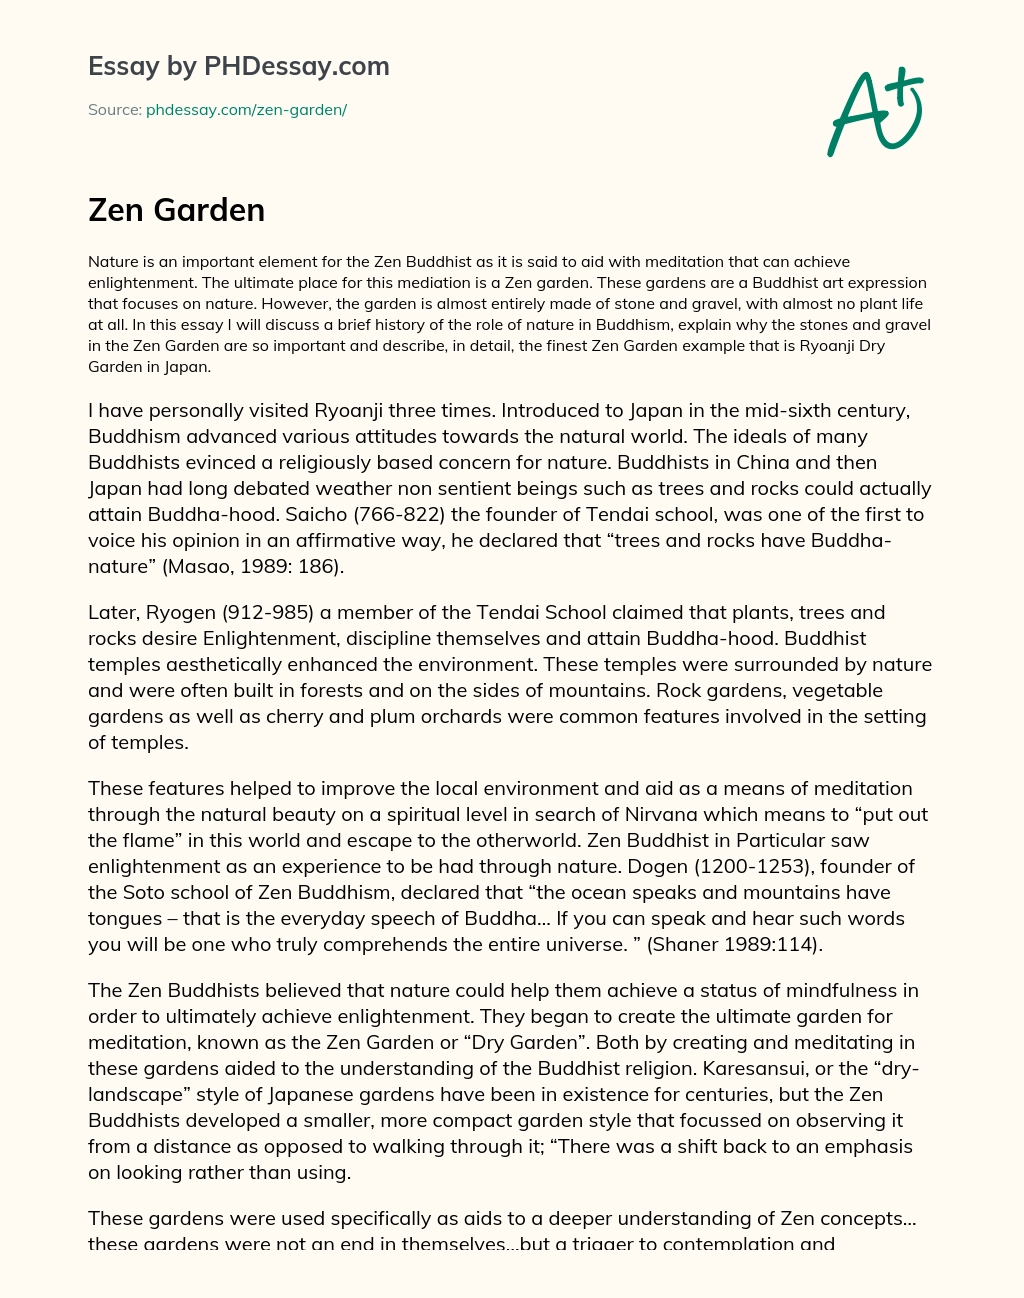 The Importance of Nature in Zen Buddhism and the Significance of Stones and Gravel in Zen Gardens essay